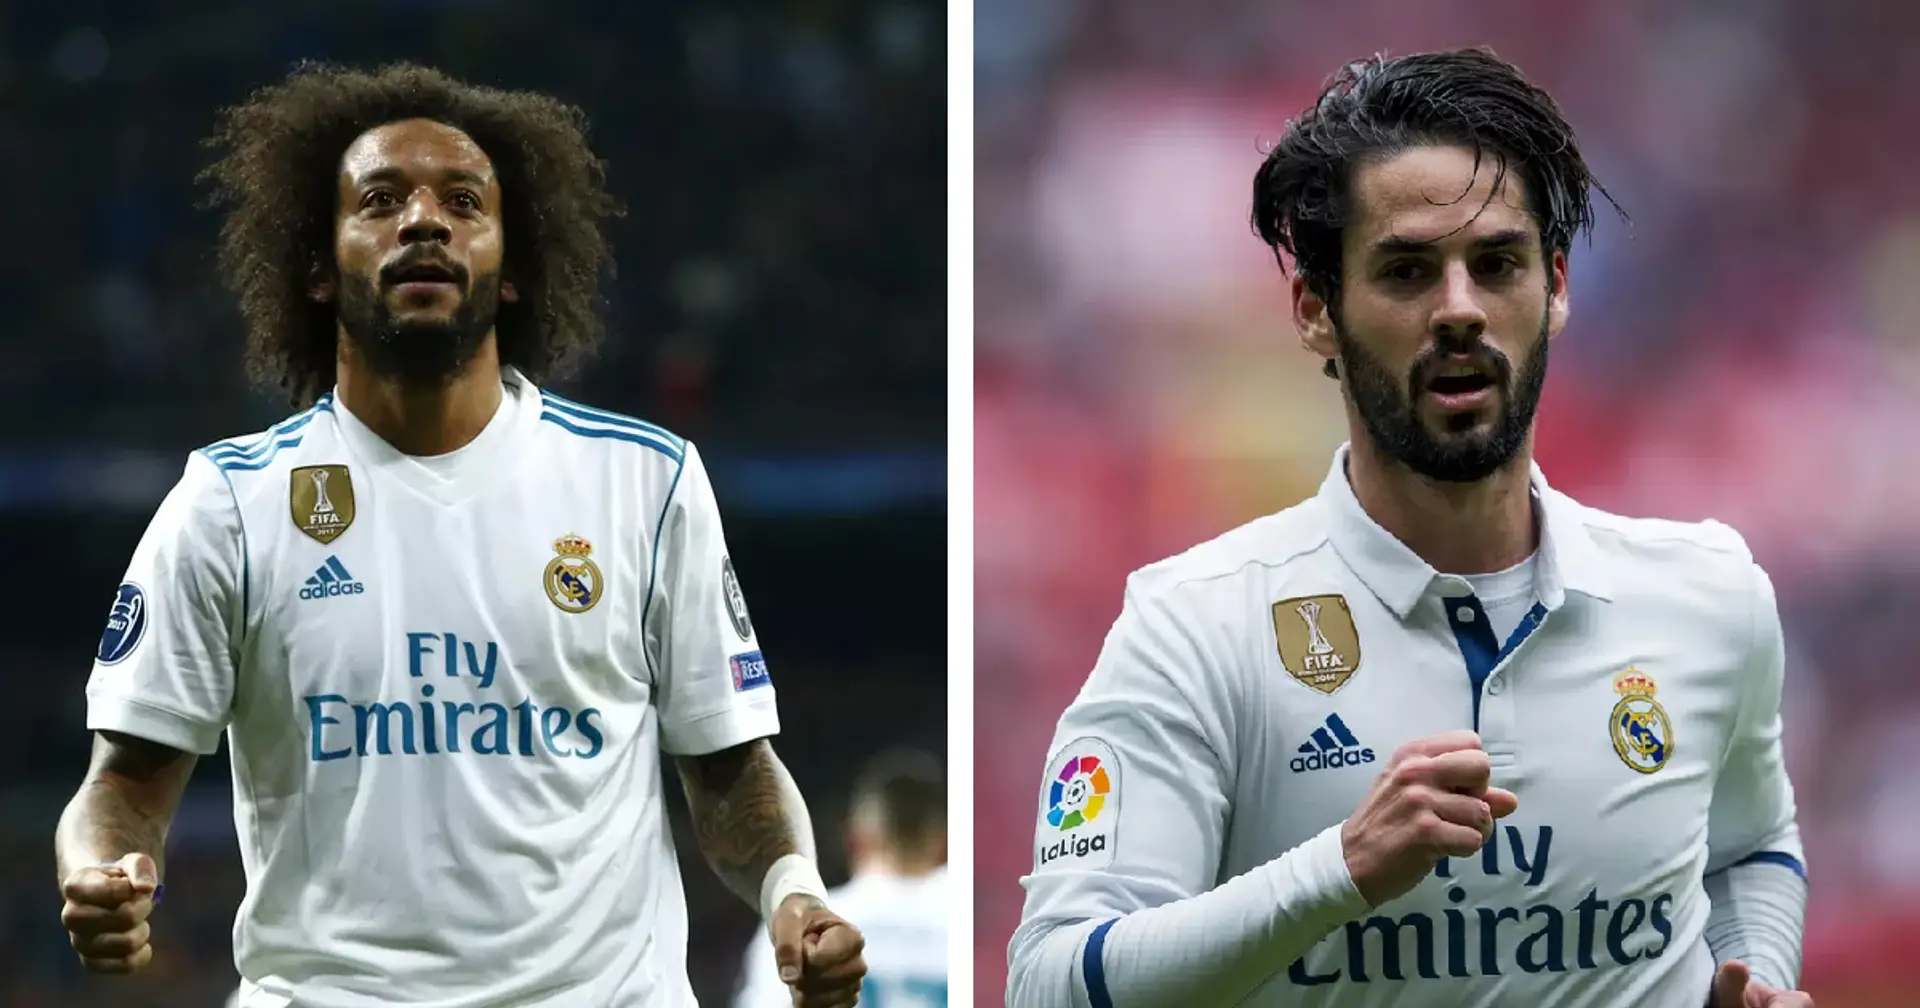 Marcelo and Isco were at their absolute worst vs Valencia - 2 major stats show why